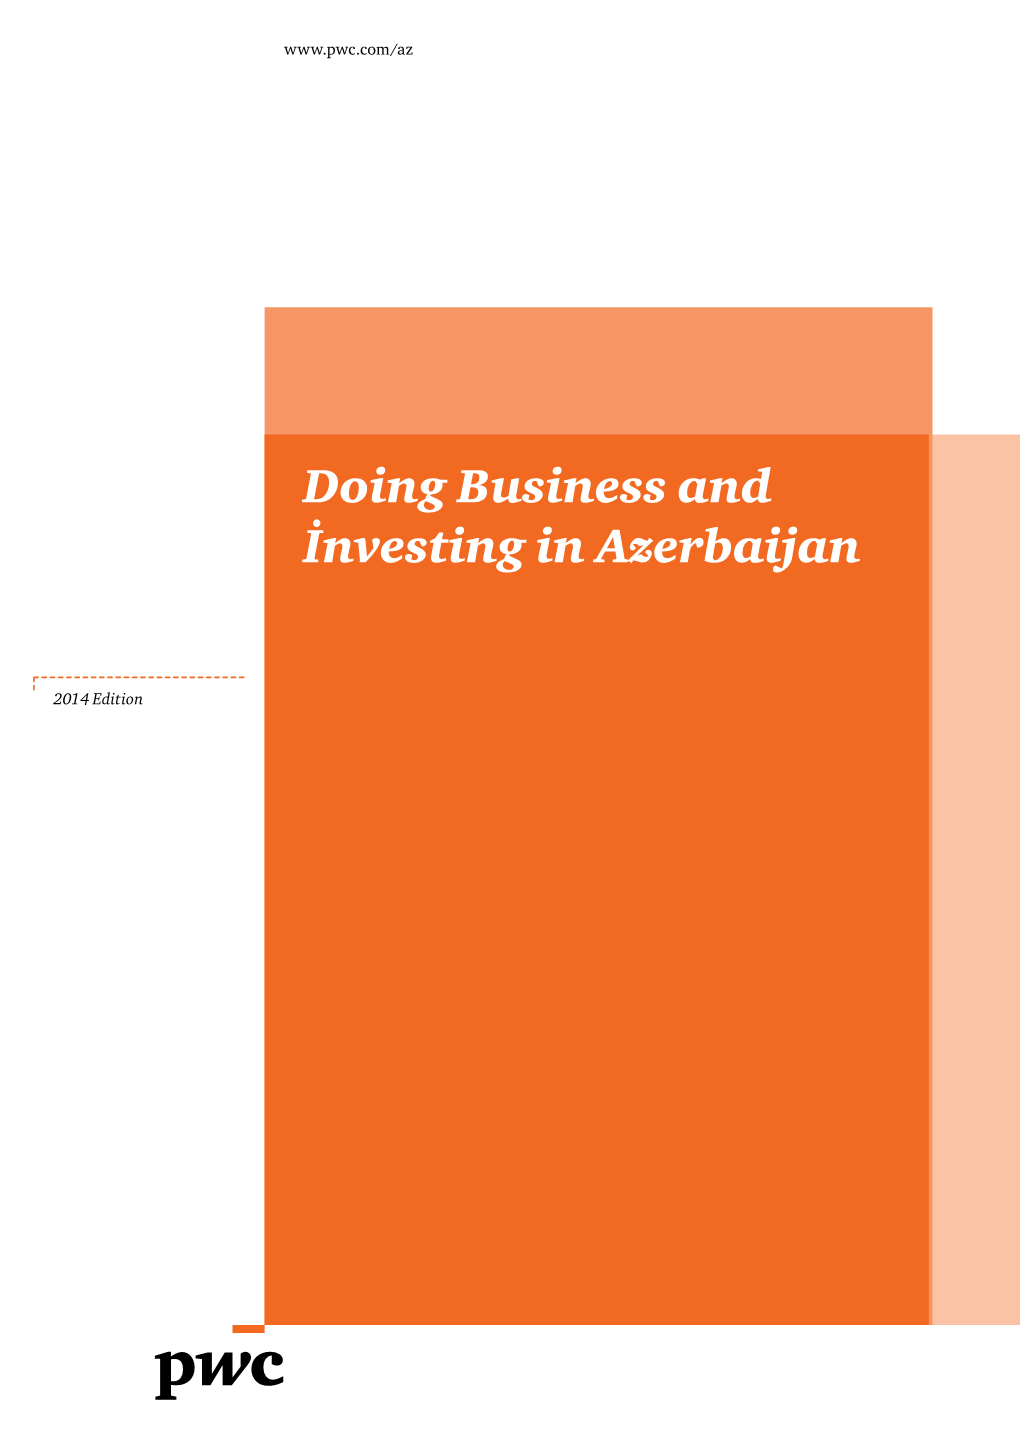 Doing Business and İnvesting in Azerbaijan 14 14 14 14 14 14 14 16 16 16 16 17 17 17 17 17 17 17 17 18 18 18 18 19 20 21 21 21